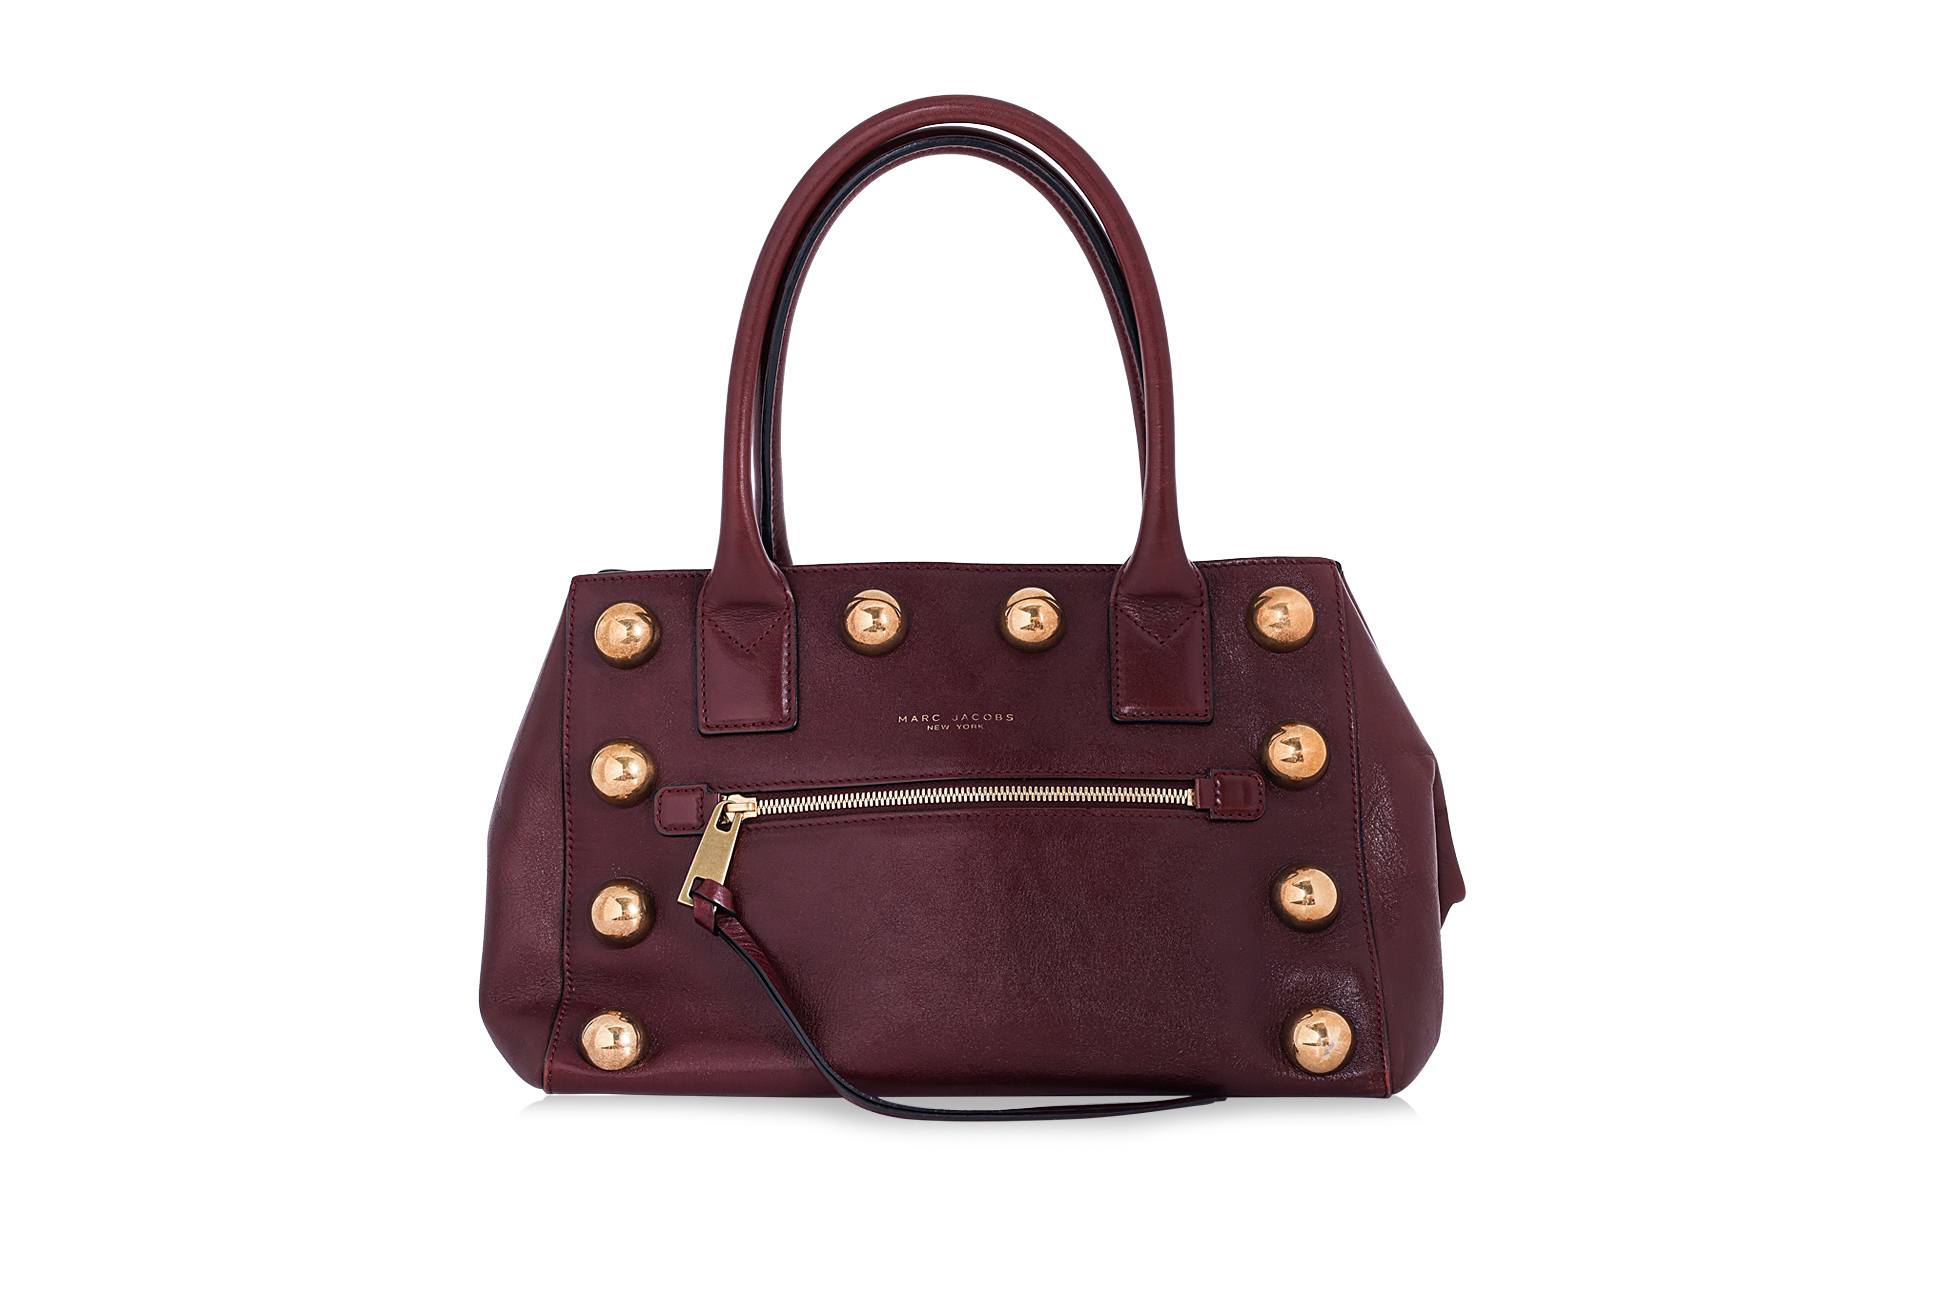 A MARC JACOBS BURGUNDY LEATHER BAG WITH GOLD STUD ACCENTS